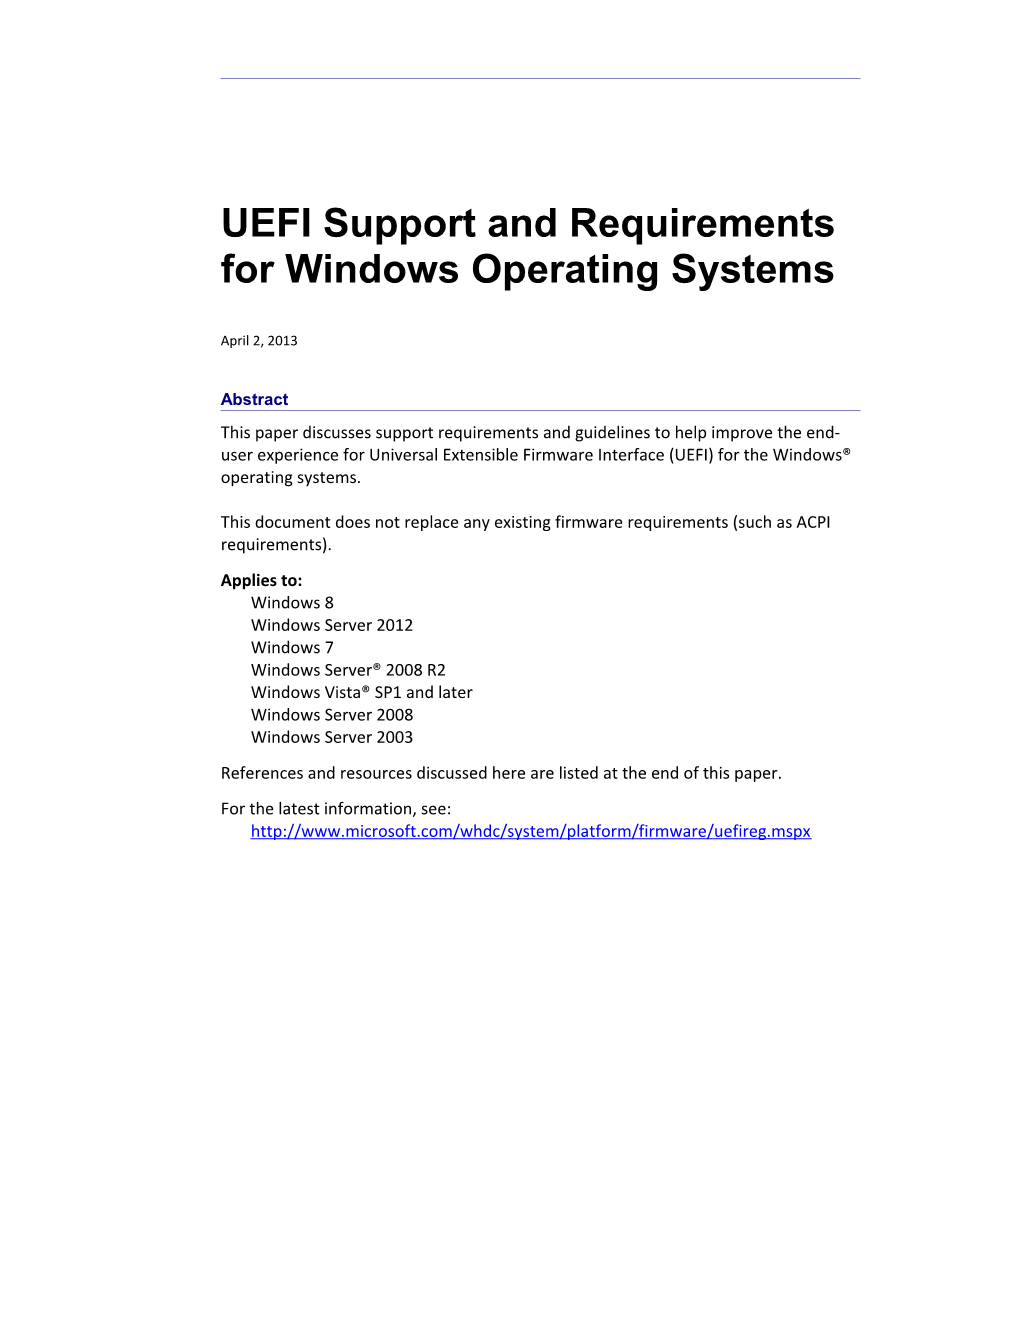 UEFI Support and Requirements for Windows Operating Systems - 8